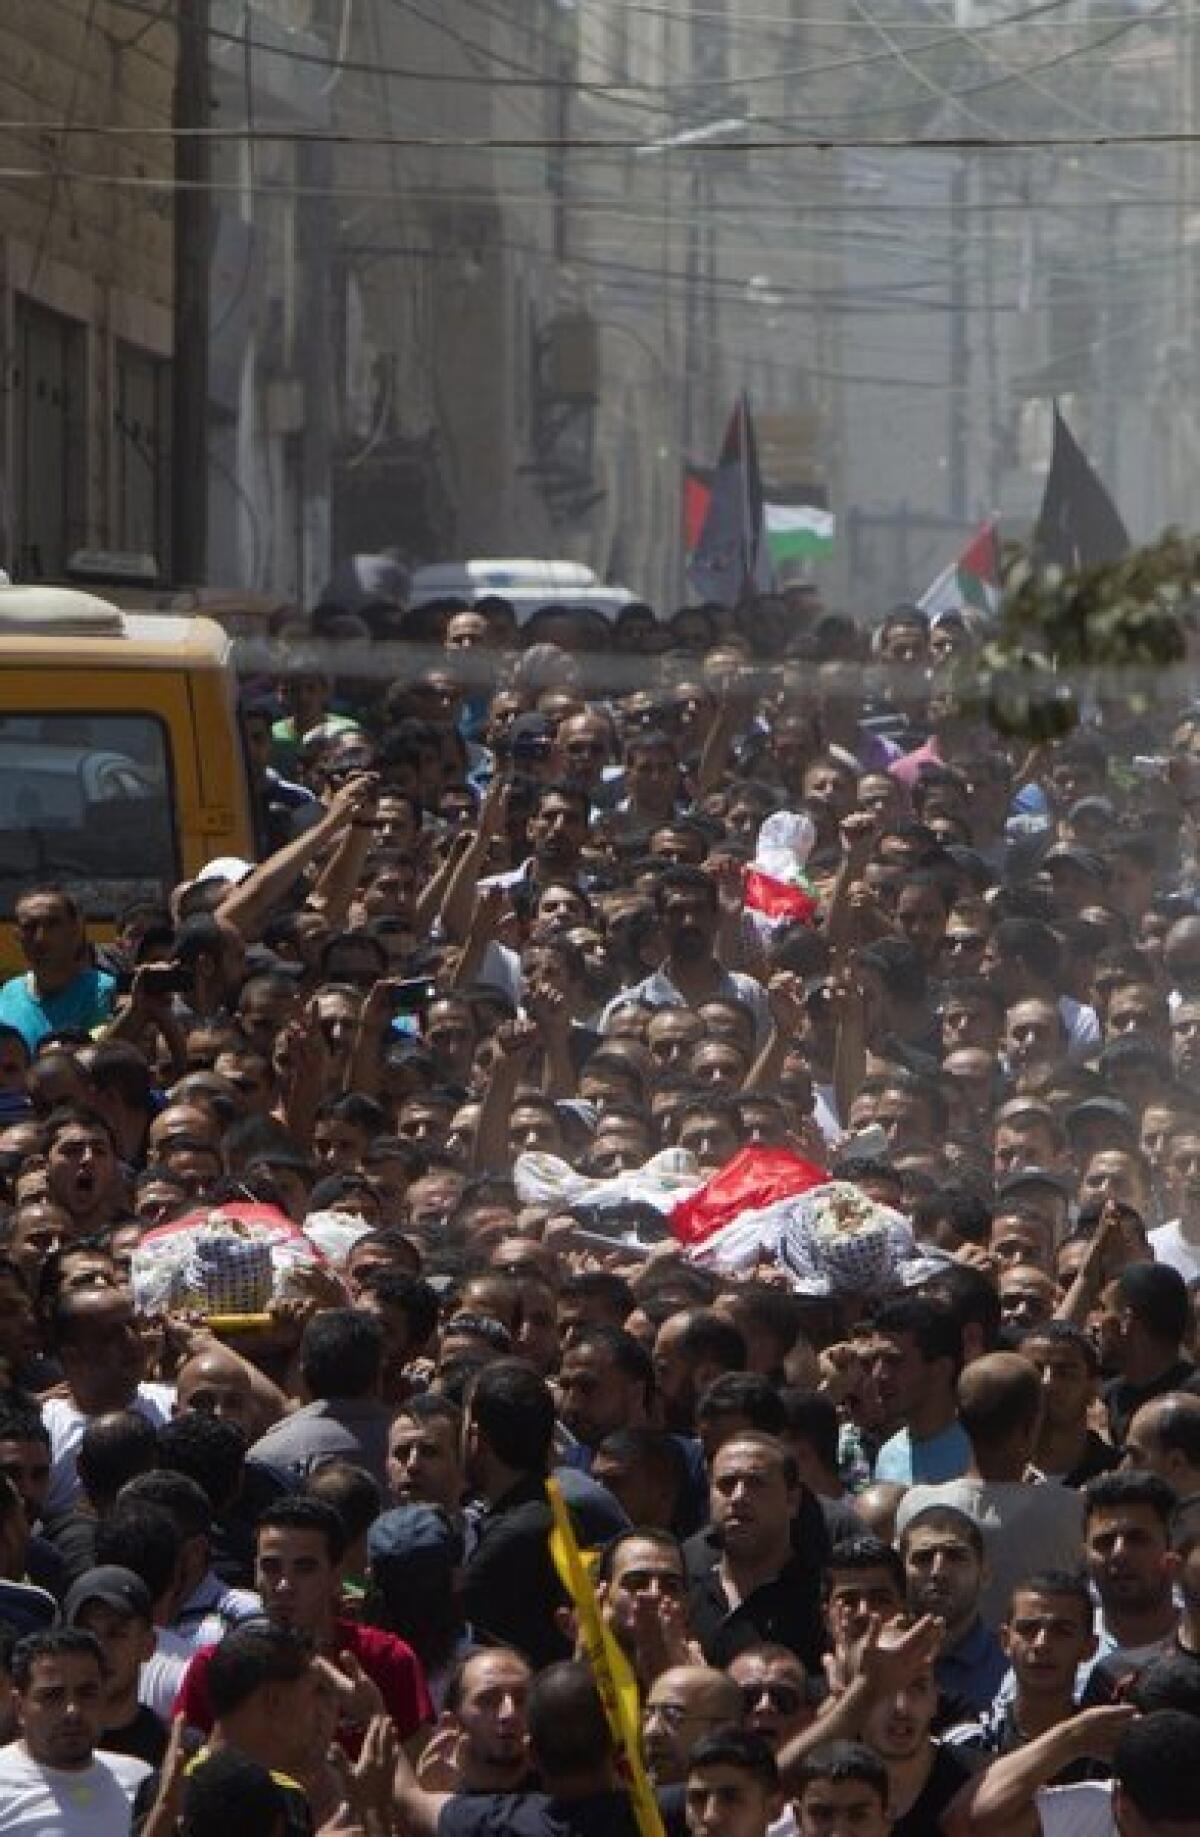 Palestinian mourners carry the bodies of three men who were killed during clashes with Israeli security forces in the West Bank's Kalandia refugee camp on Monday.